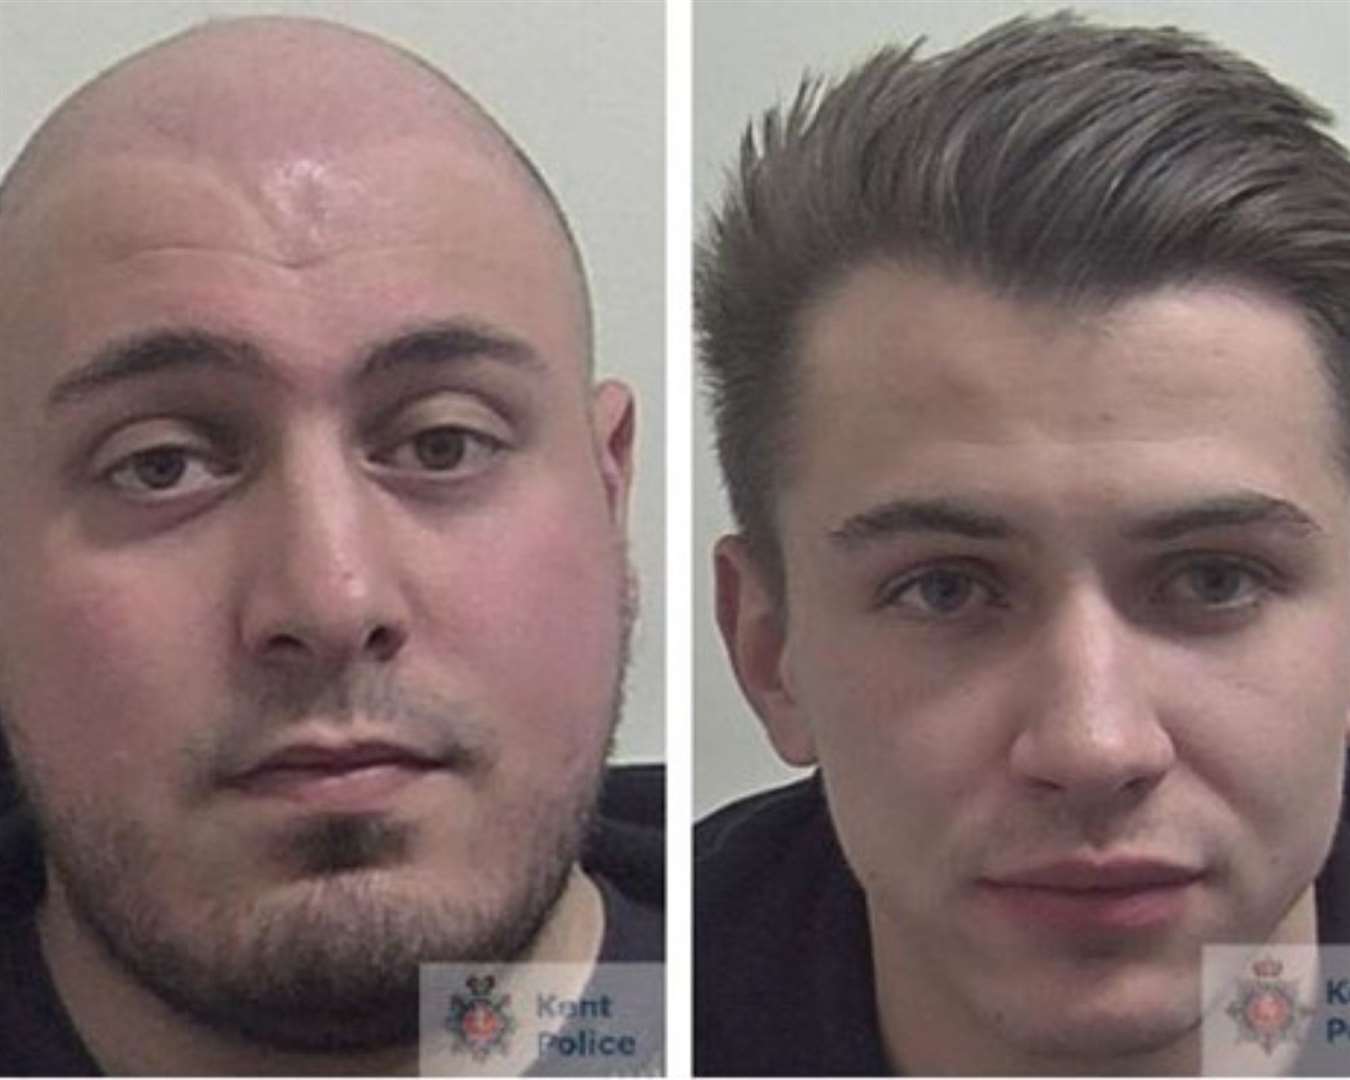 Hussein Alwari (left) and Cosmo Budd have both been jailed. Picture: Kent Police